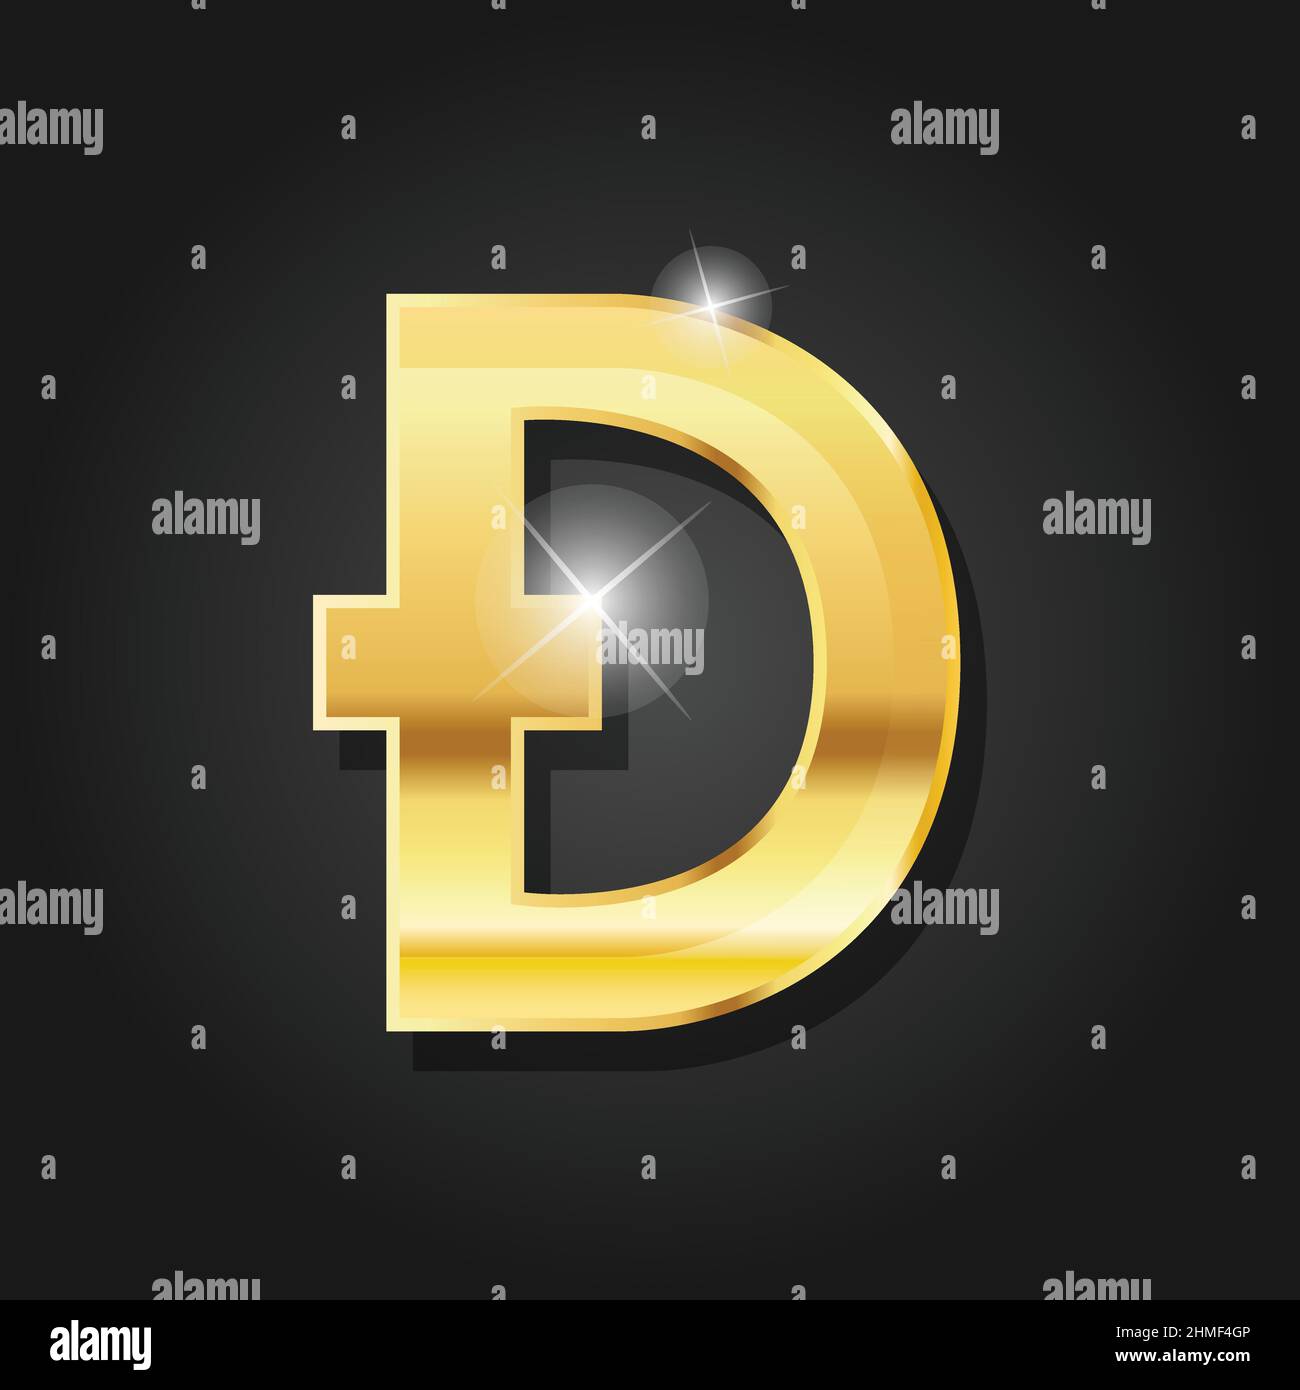 Golden shiny dogecoin icon badge symbol vector image. Golden digital cryptocurrency coin. Electronics finance money symbol. Stock Vector